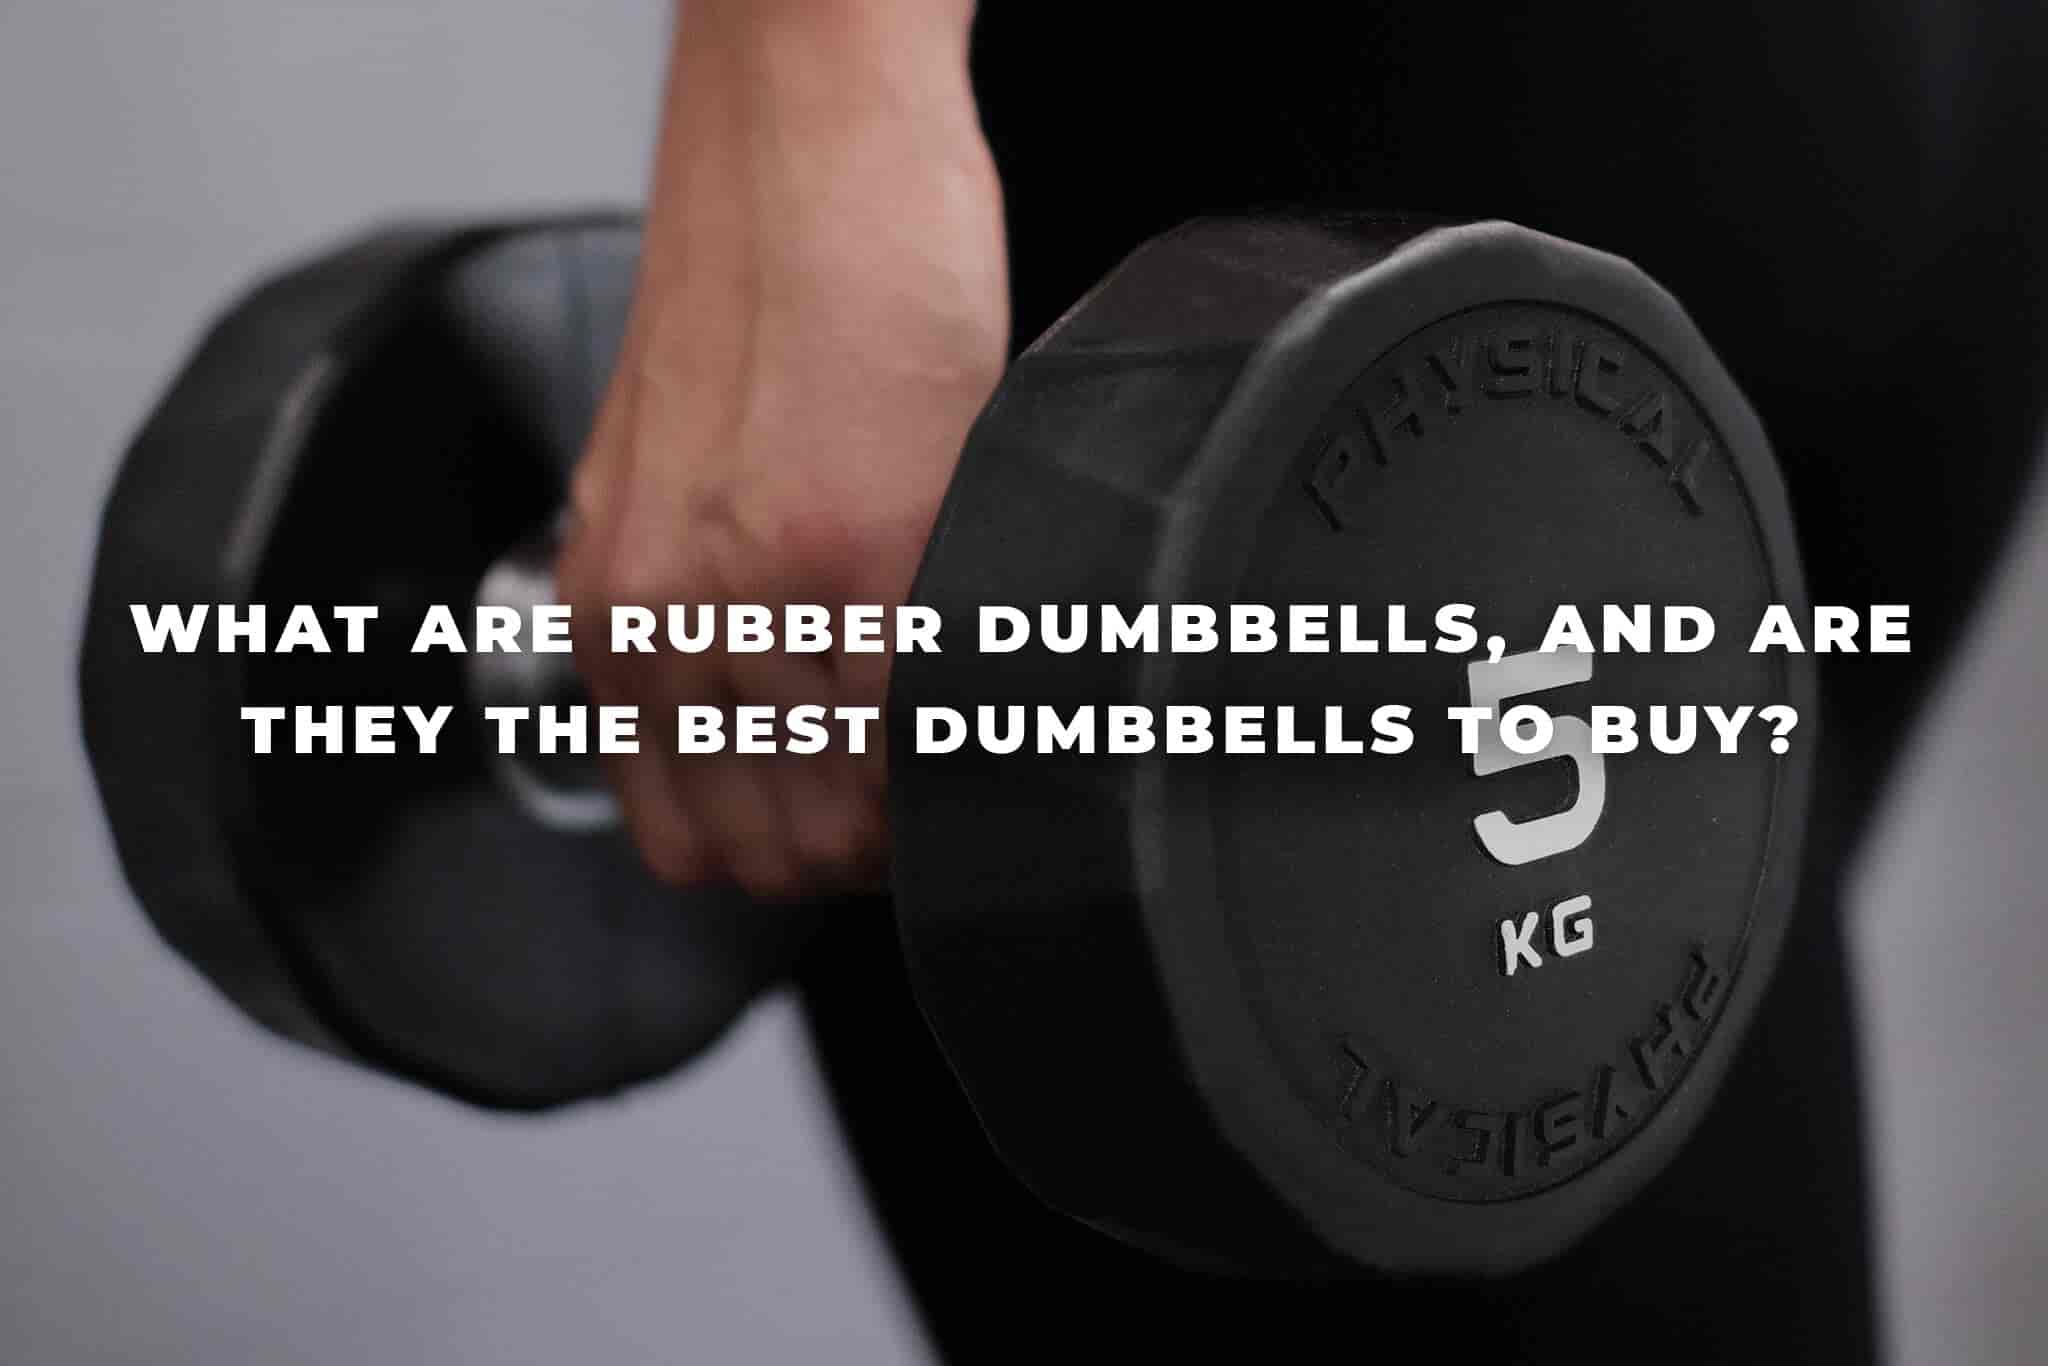 What are rubber dumbbells, and are they the best dumbbells to buy?